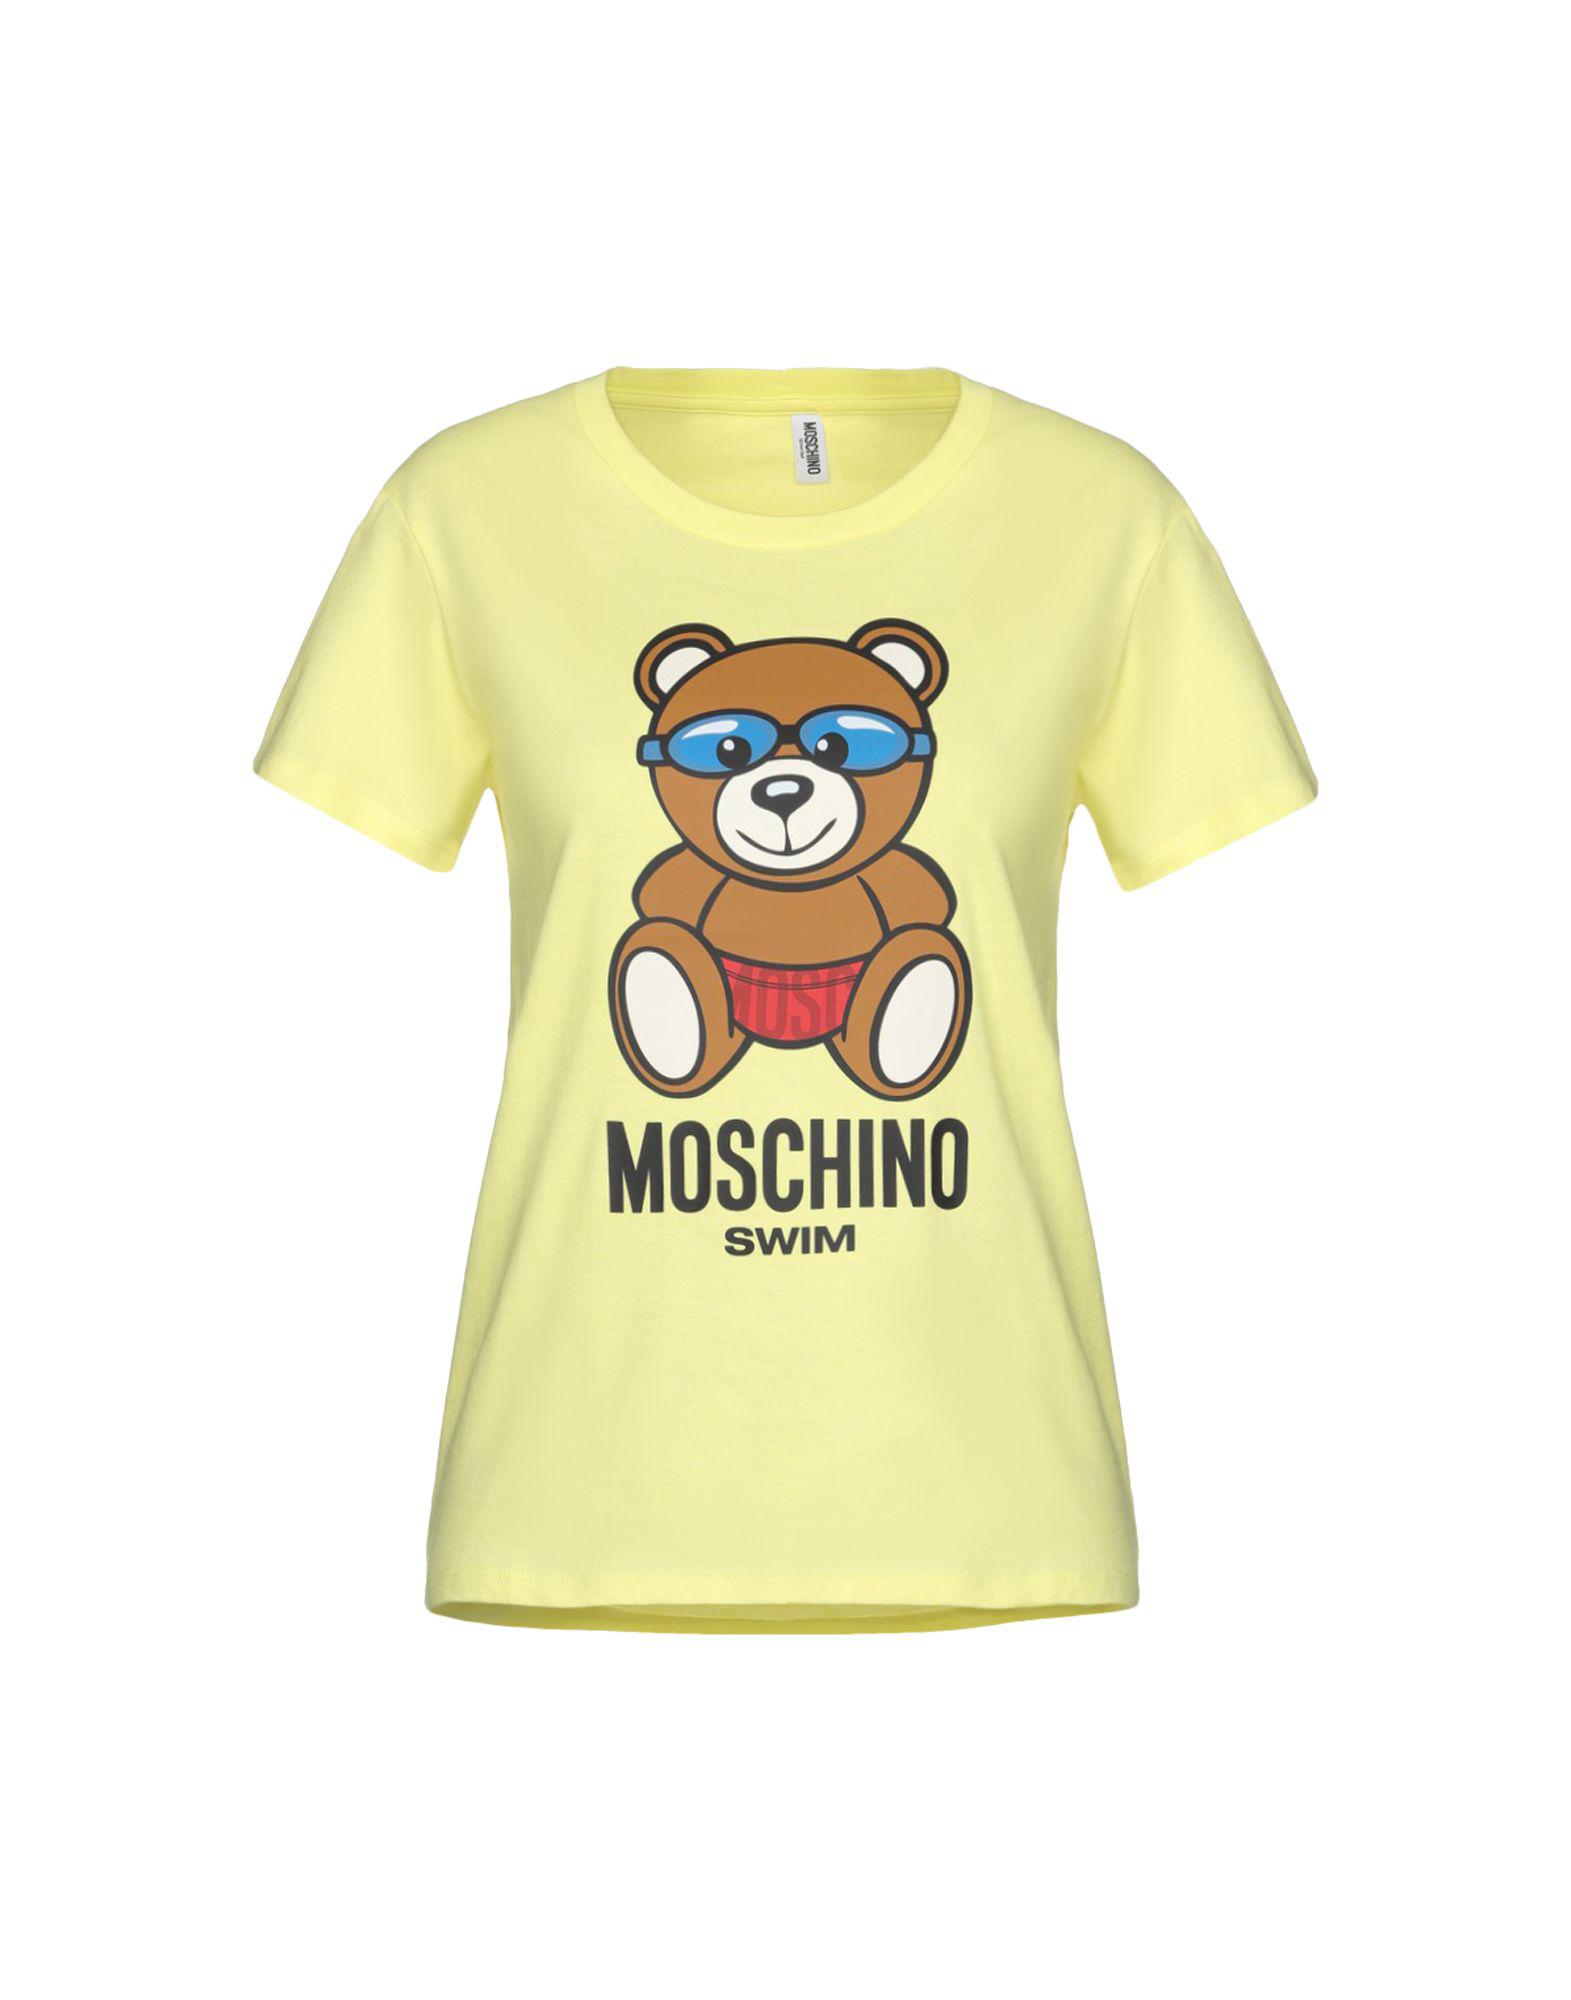 Moschino Cotton T-shirt in Yellow - Lyst